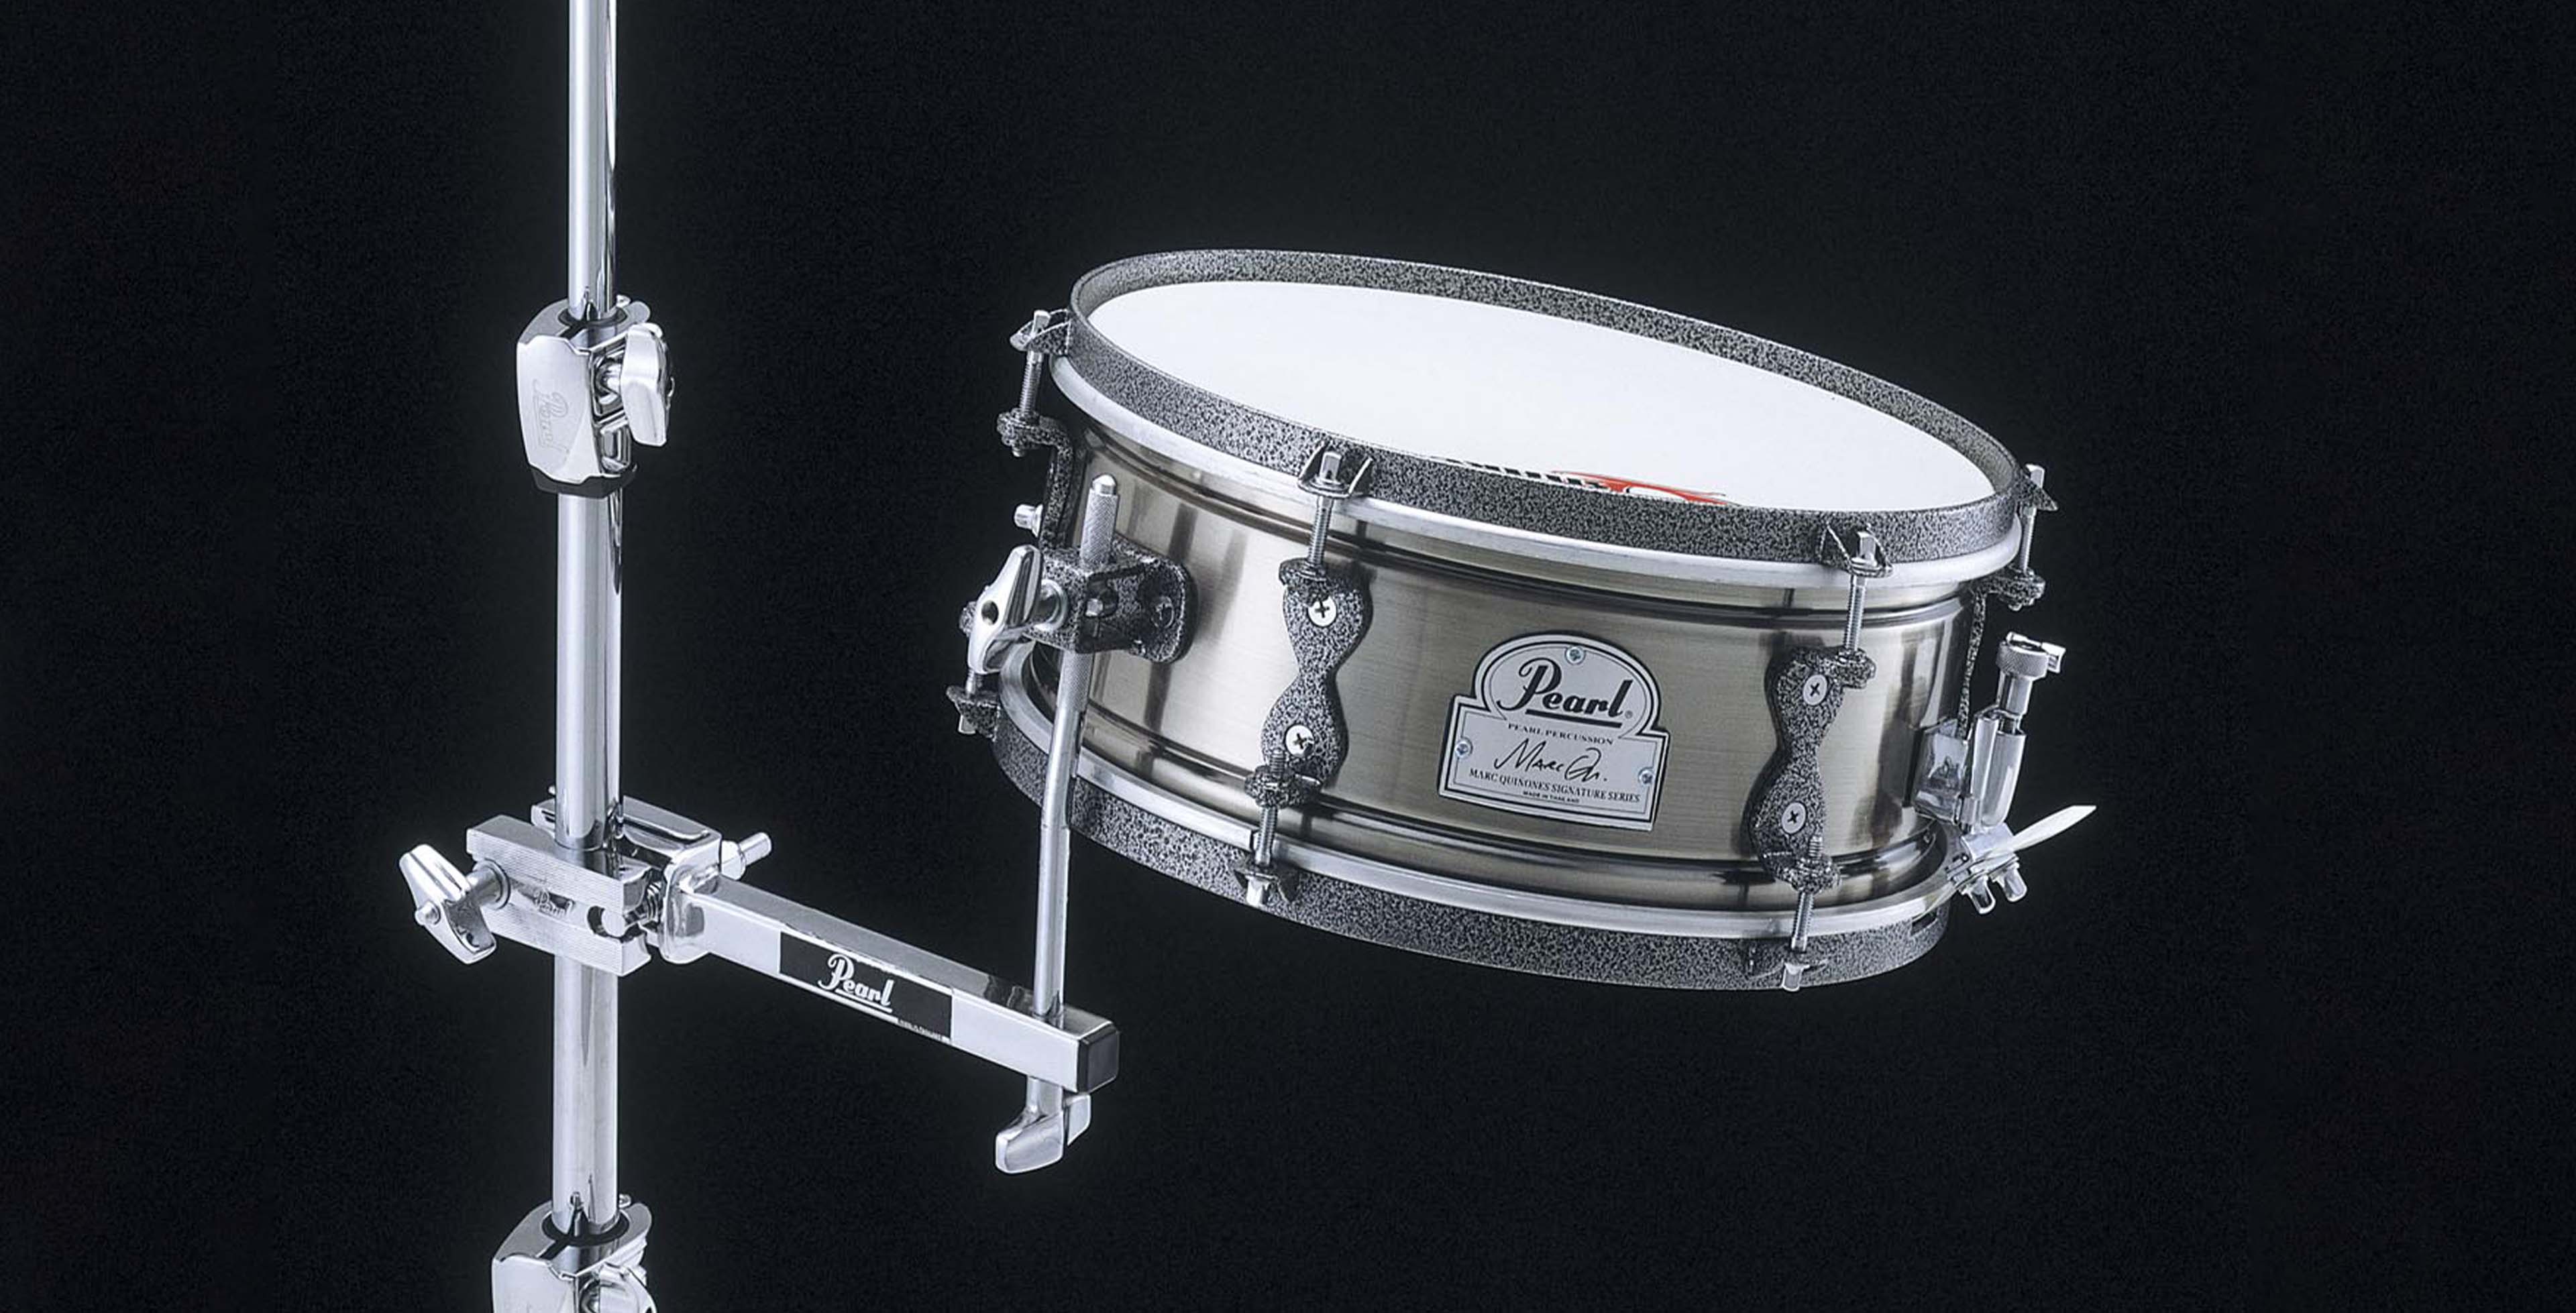 Q-Popper Timbal Snare | パール楽器【公式サイト】Pearl Drums